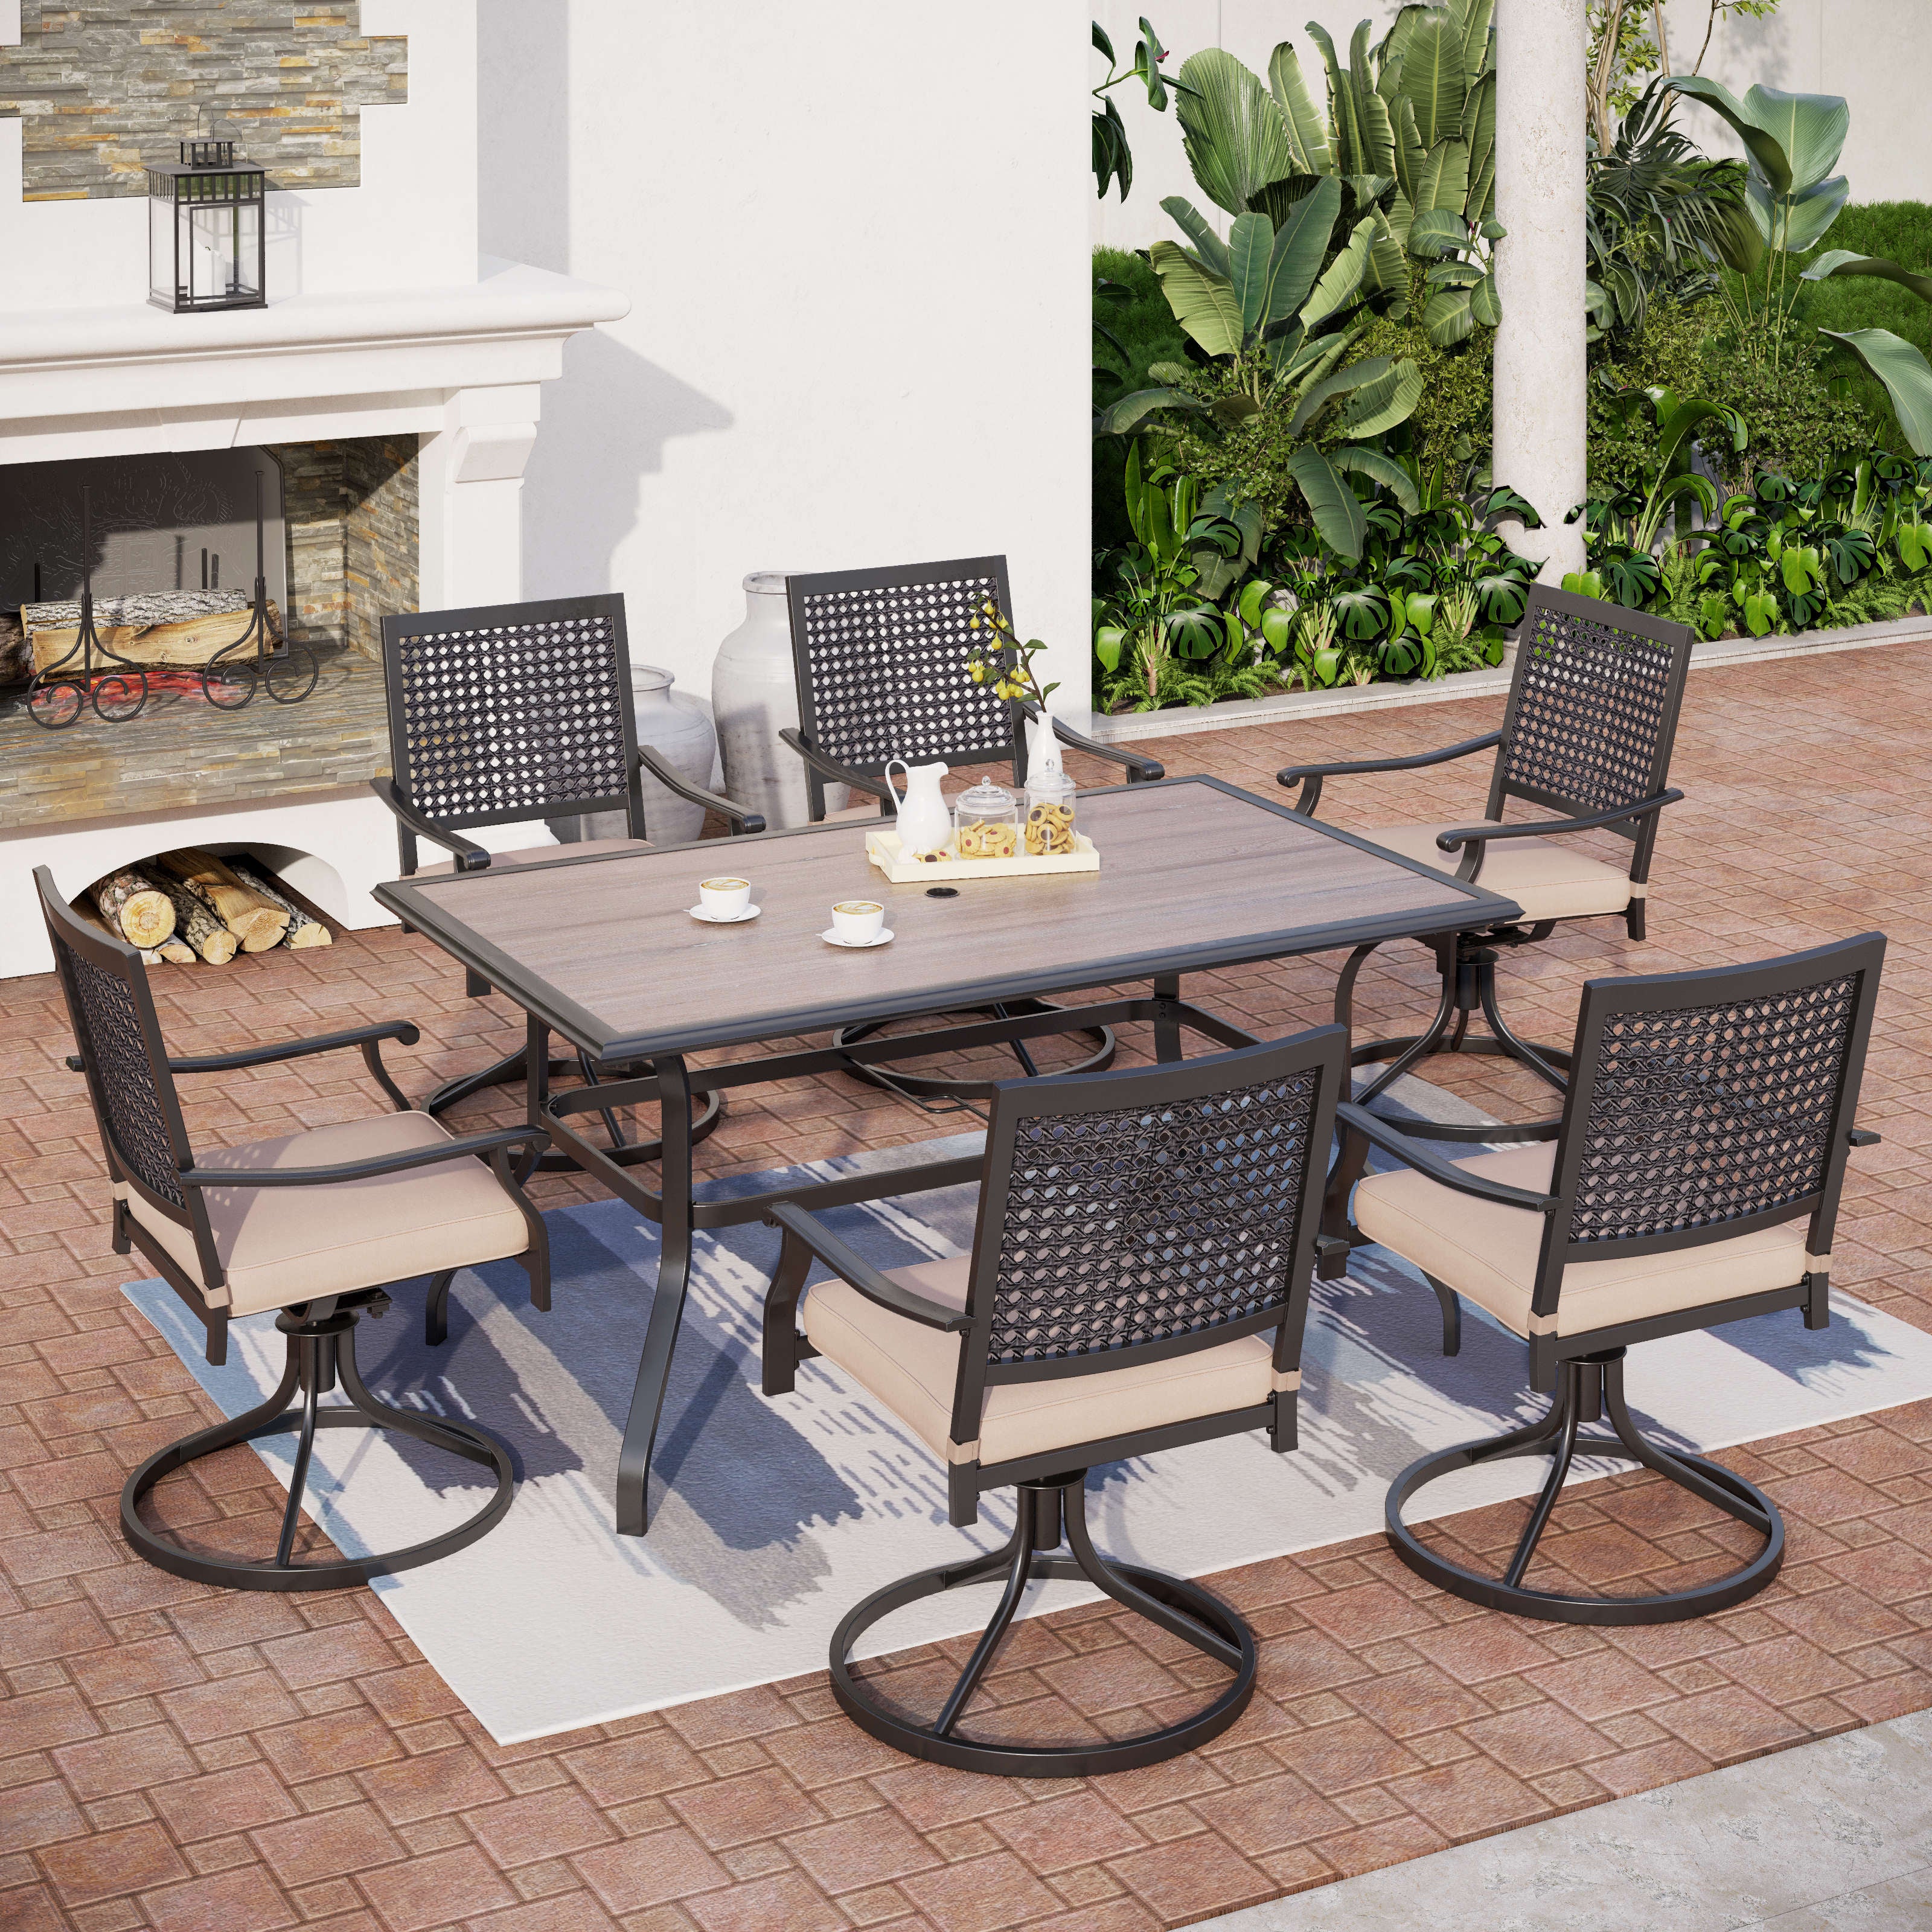 MFSTUDIO 7-Piece Outdoor Dining Set Wood-look Table & Bull's Eye Pattern Dining Chairs